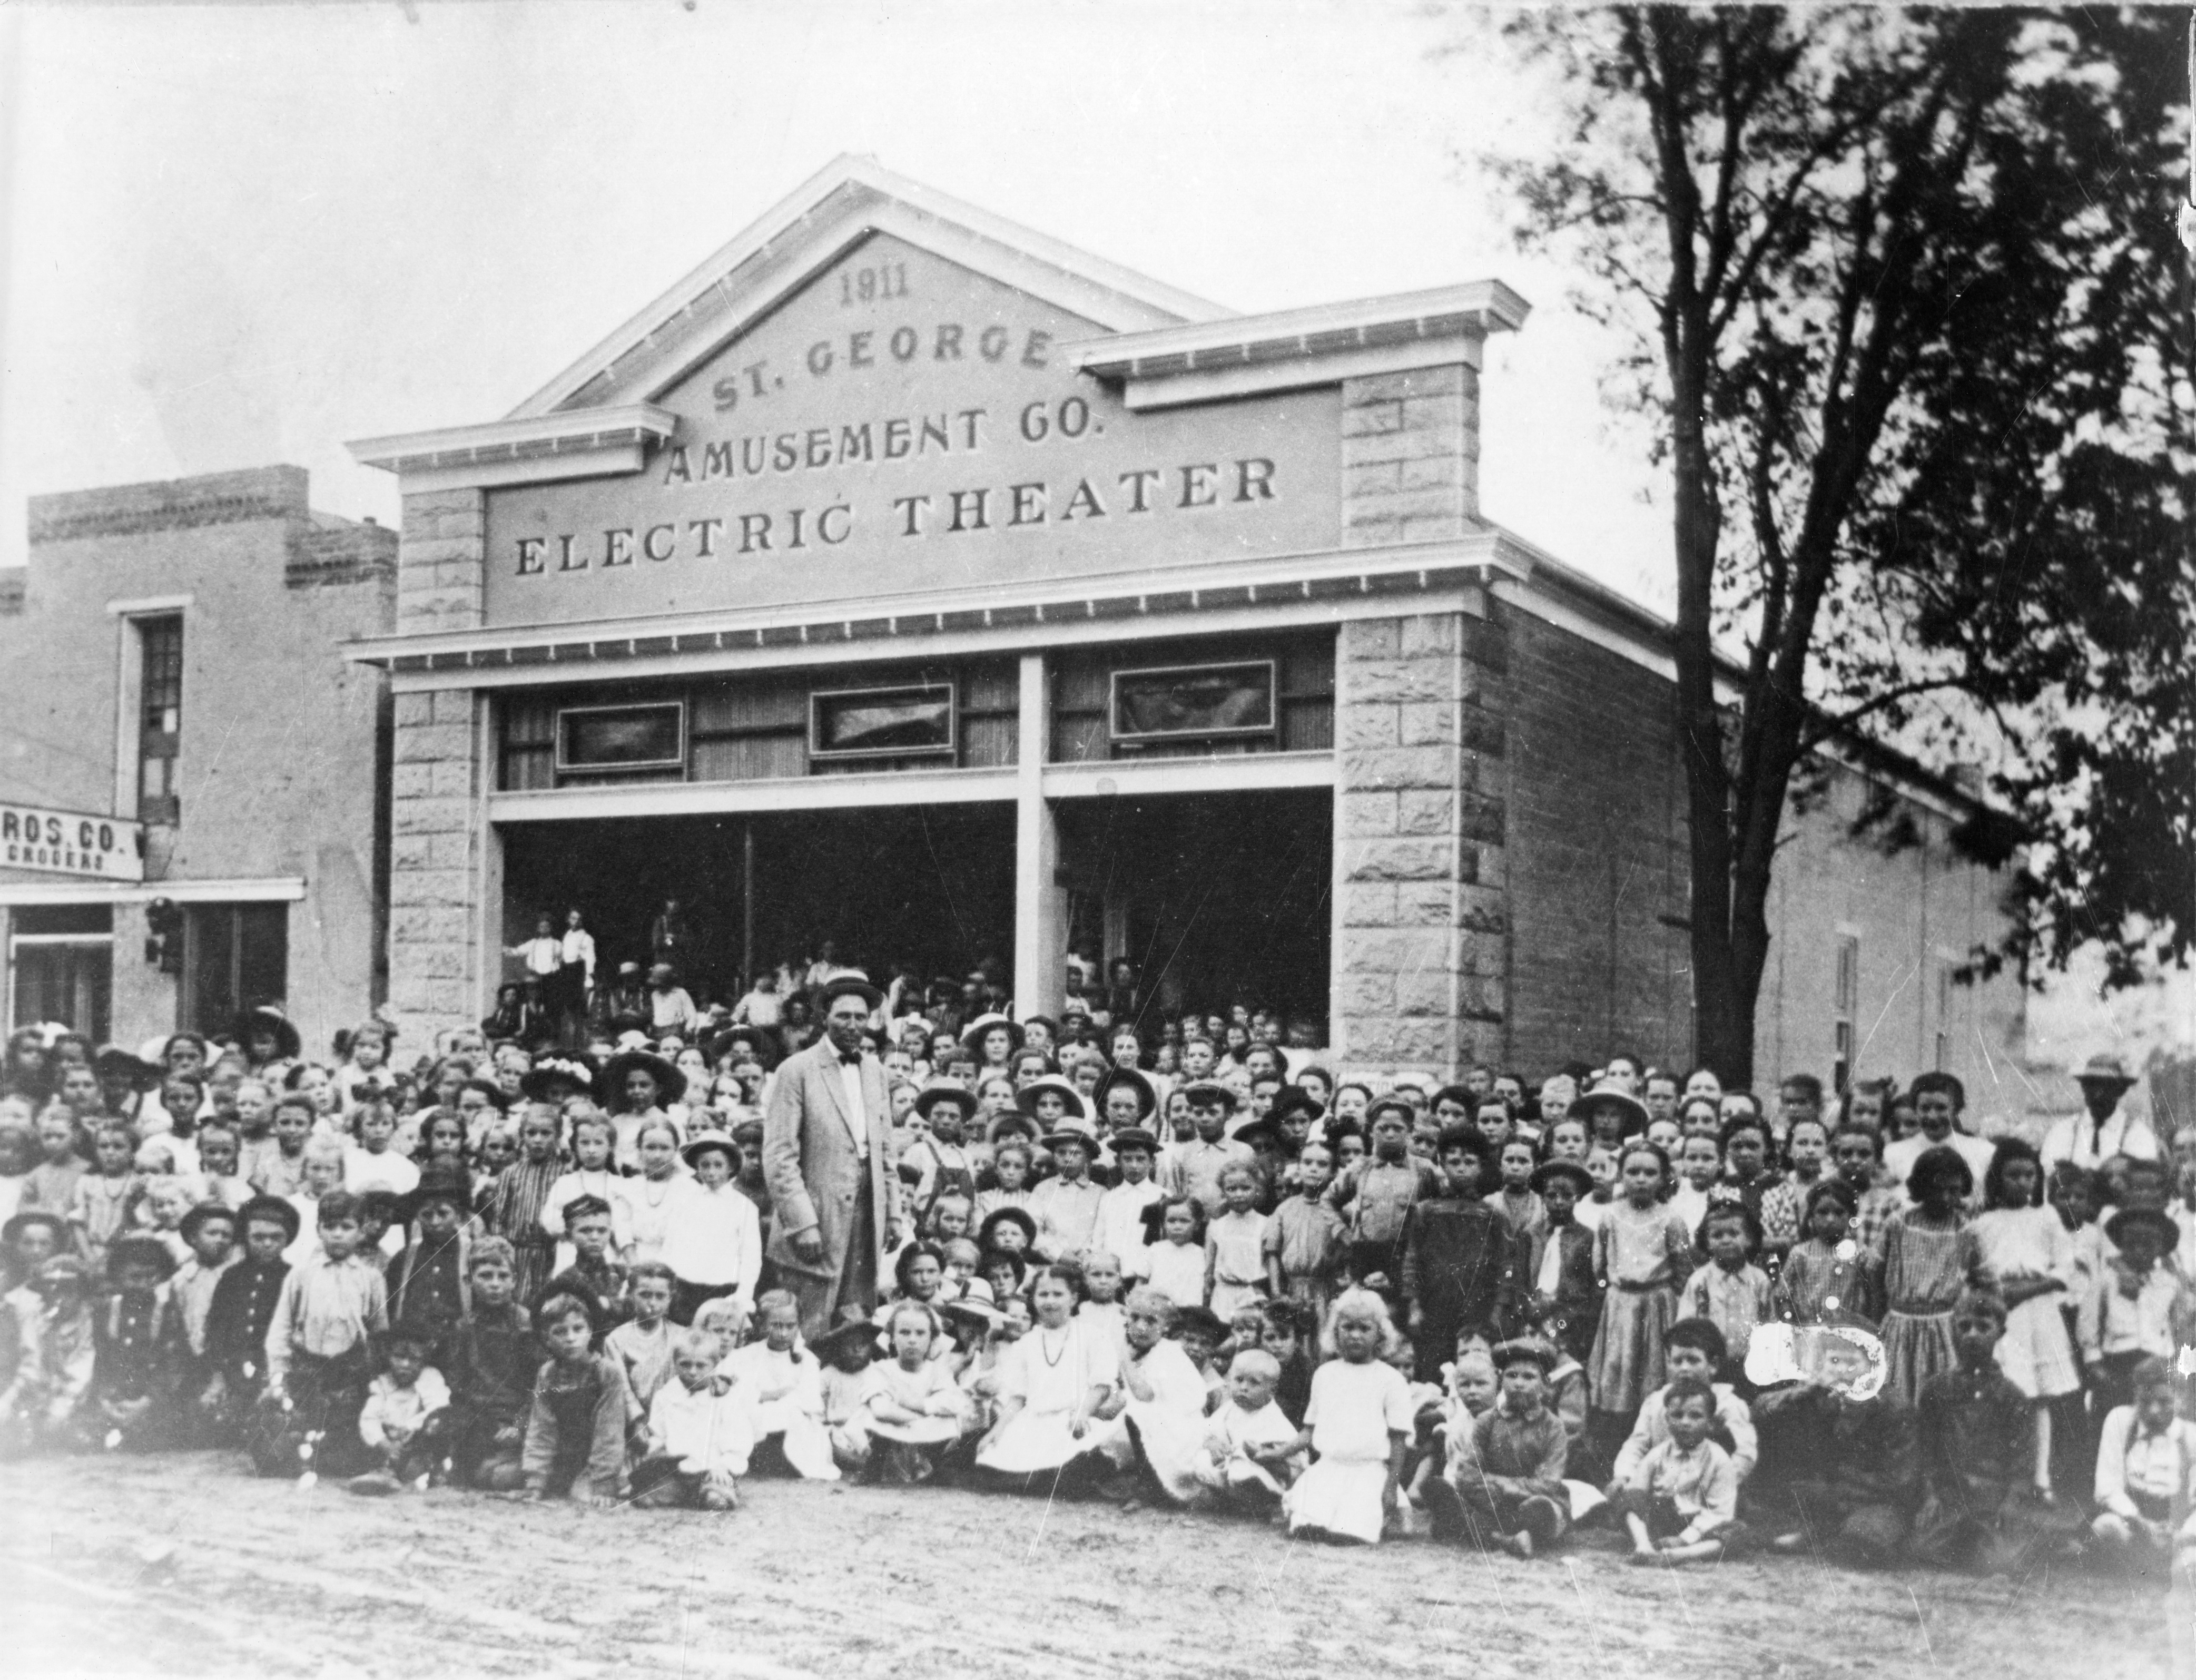 A large group of people (mostly children) out in front of the Electric Theater in St. George